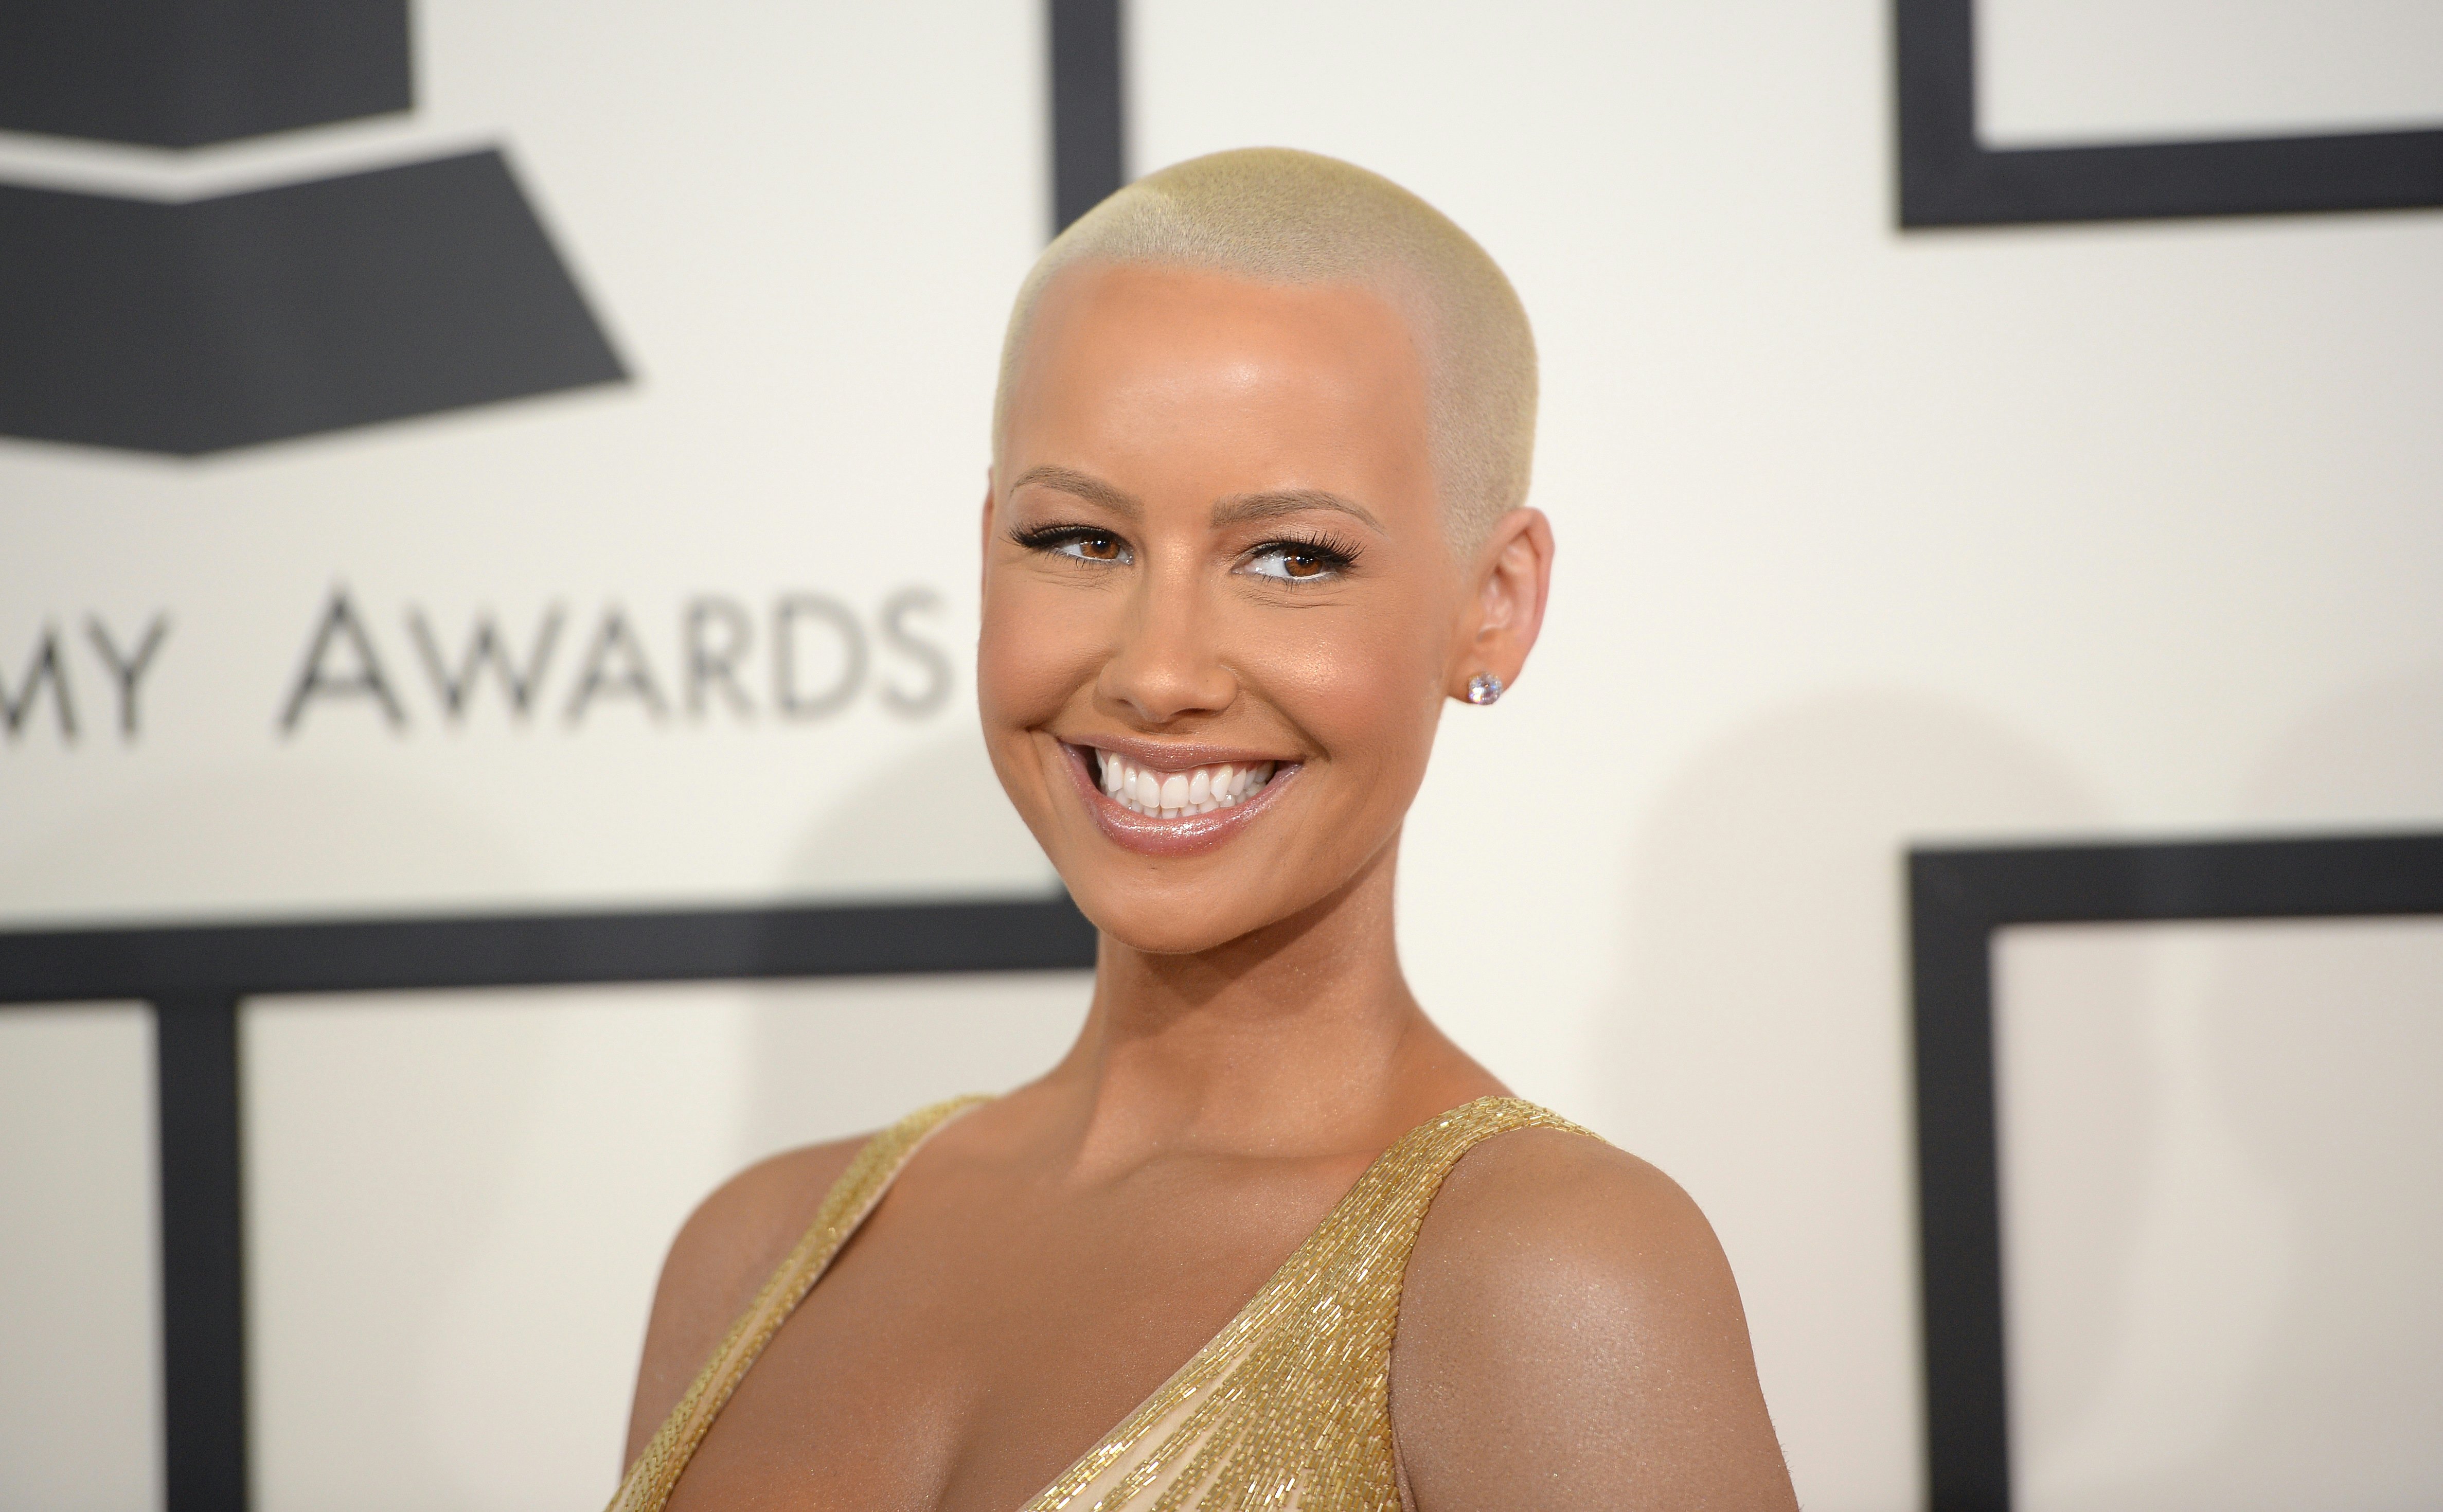 Amber rose thick and disgusting for some black magazine